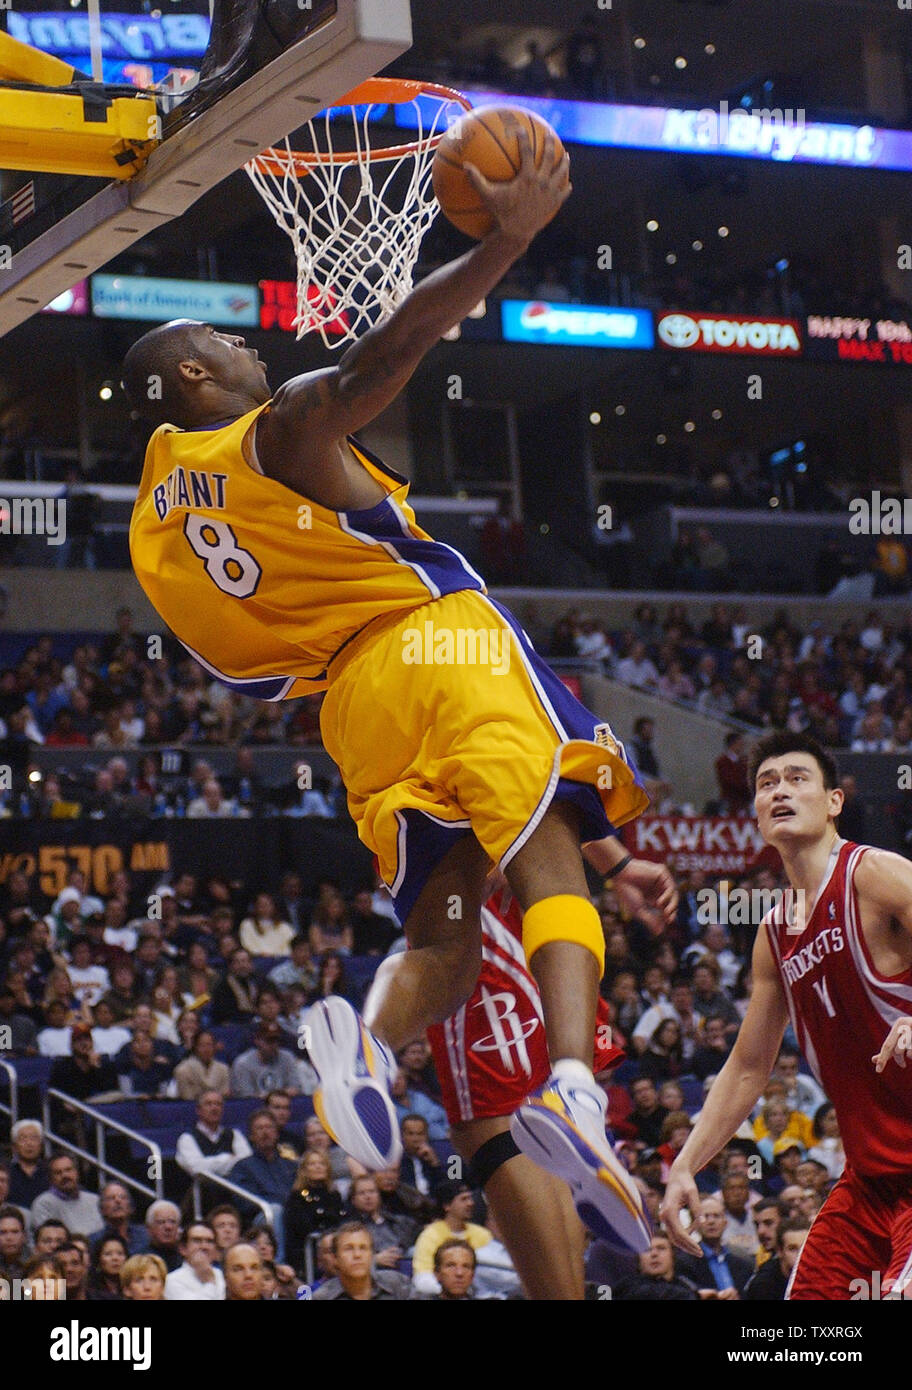 Los Angeles Lakers guard Kobe Bryant scores two points on a reverse jam during third quarter action as Houston Rocket center Yao Ming of China looks on in their NBA game at Staples Center in Los Angeles January 7, 2005. The Lakers defeated The Rockets 111-104.   (UPI Photo/Jim Ruymen) Stock Photo